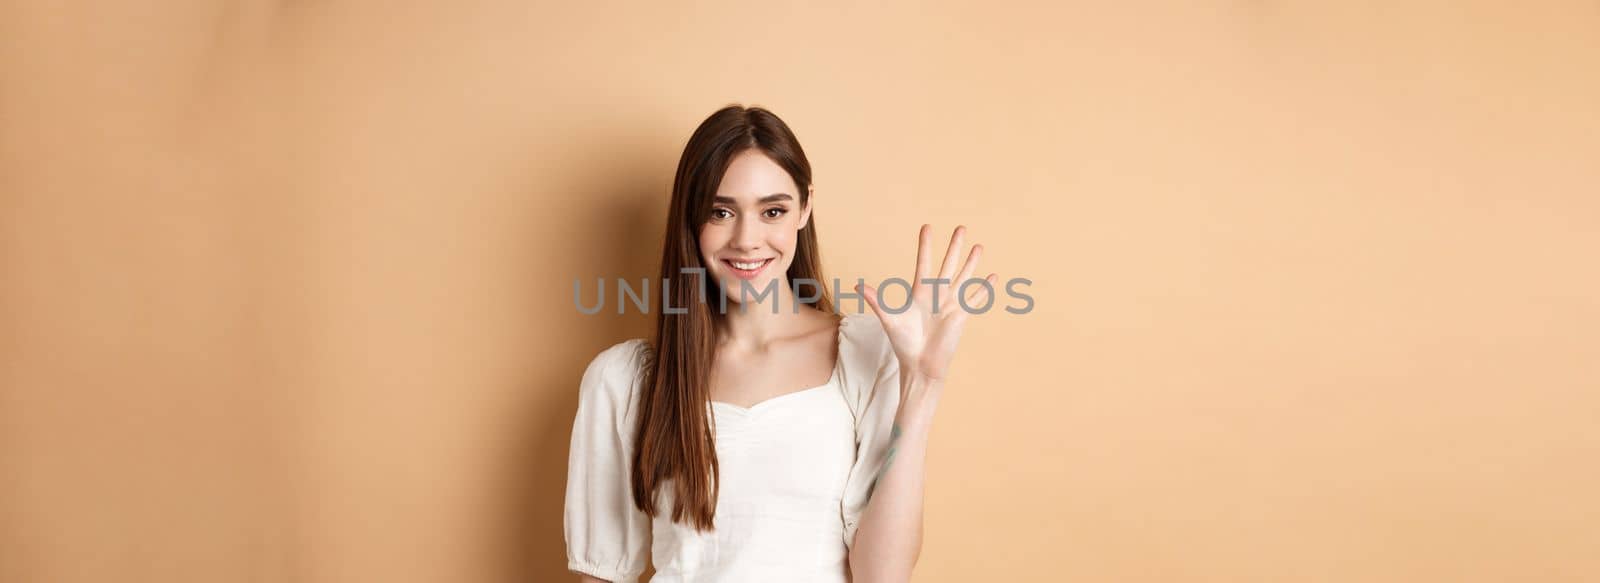 Attractive young woman show fingers number five, smiling and looking confident, standing on beige background.